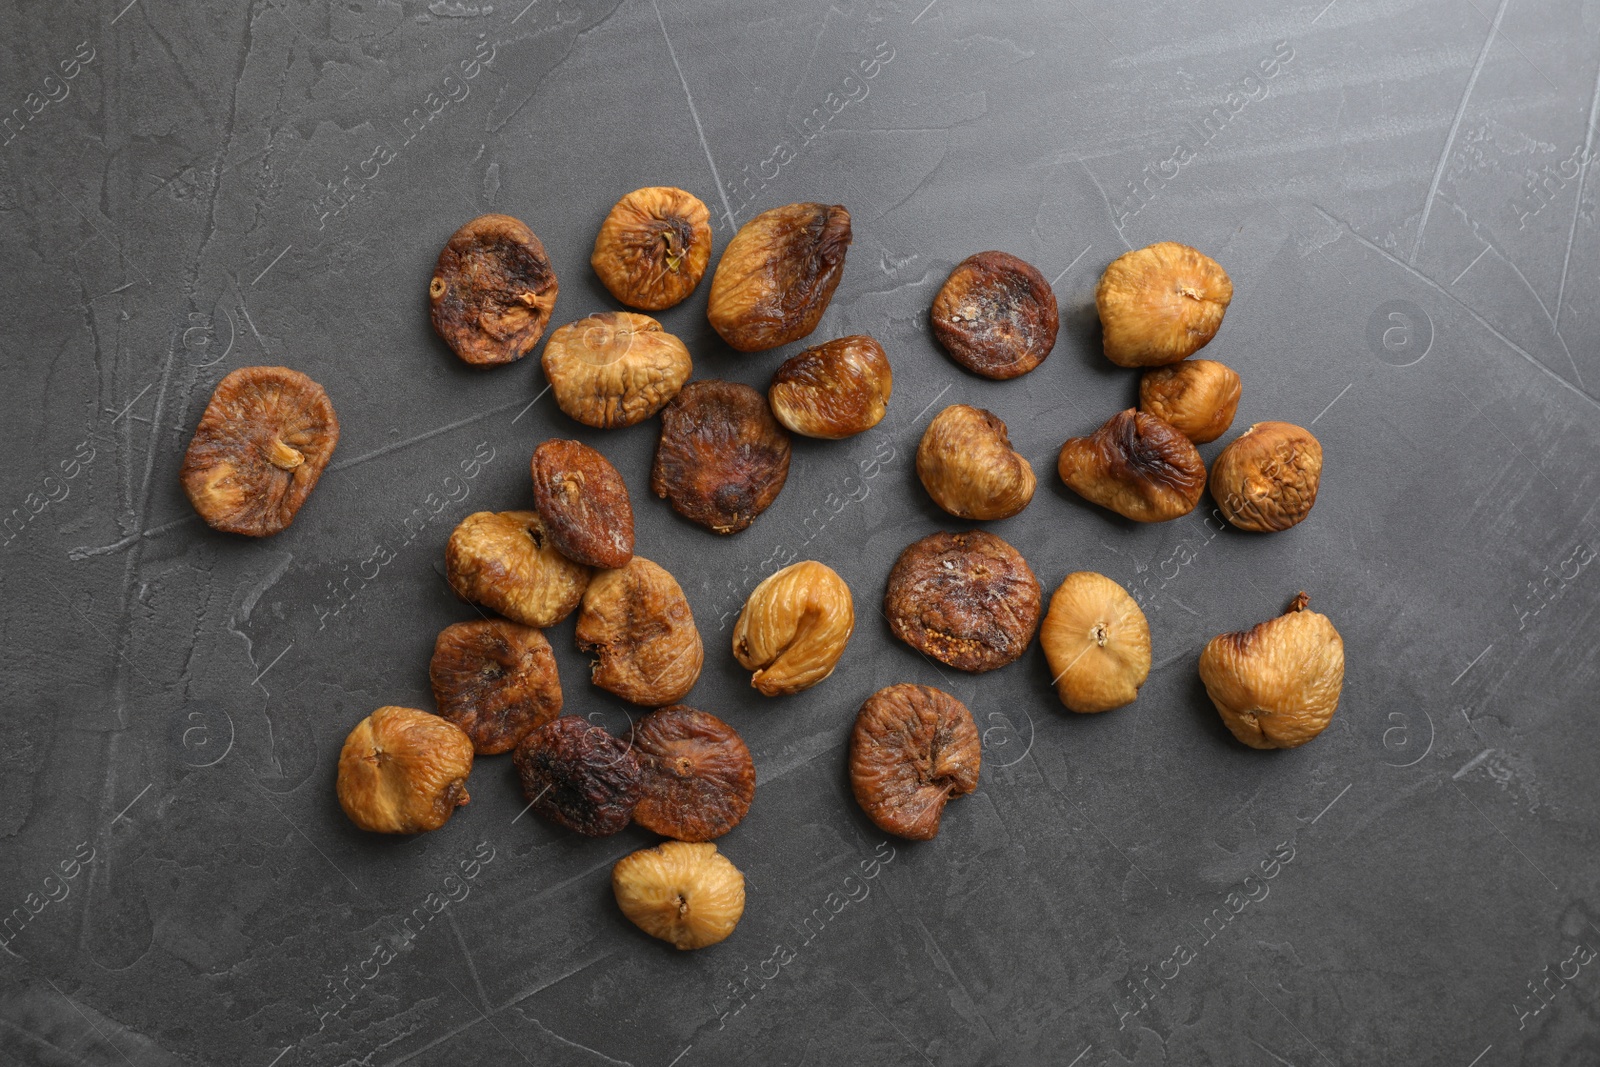 Photo of delicious dried figs on grey background, top view. Organic snack